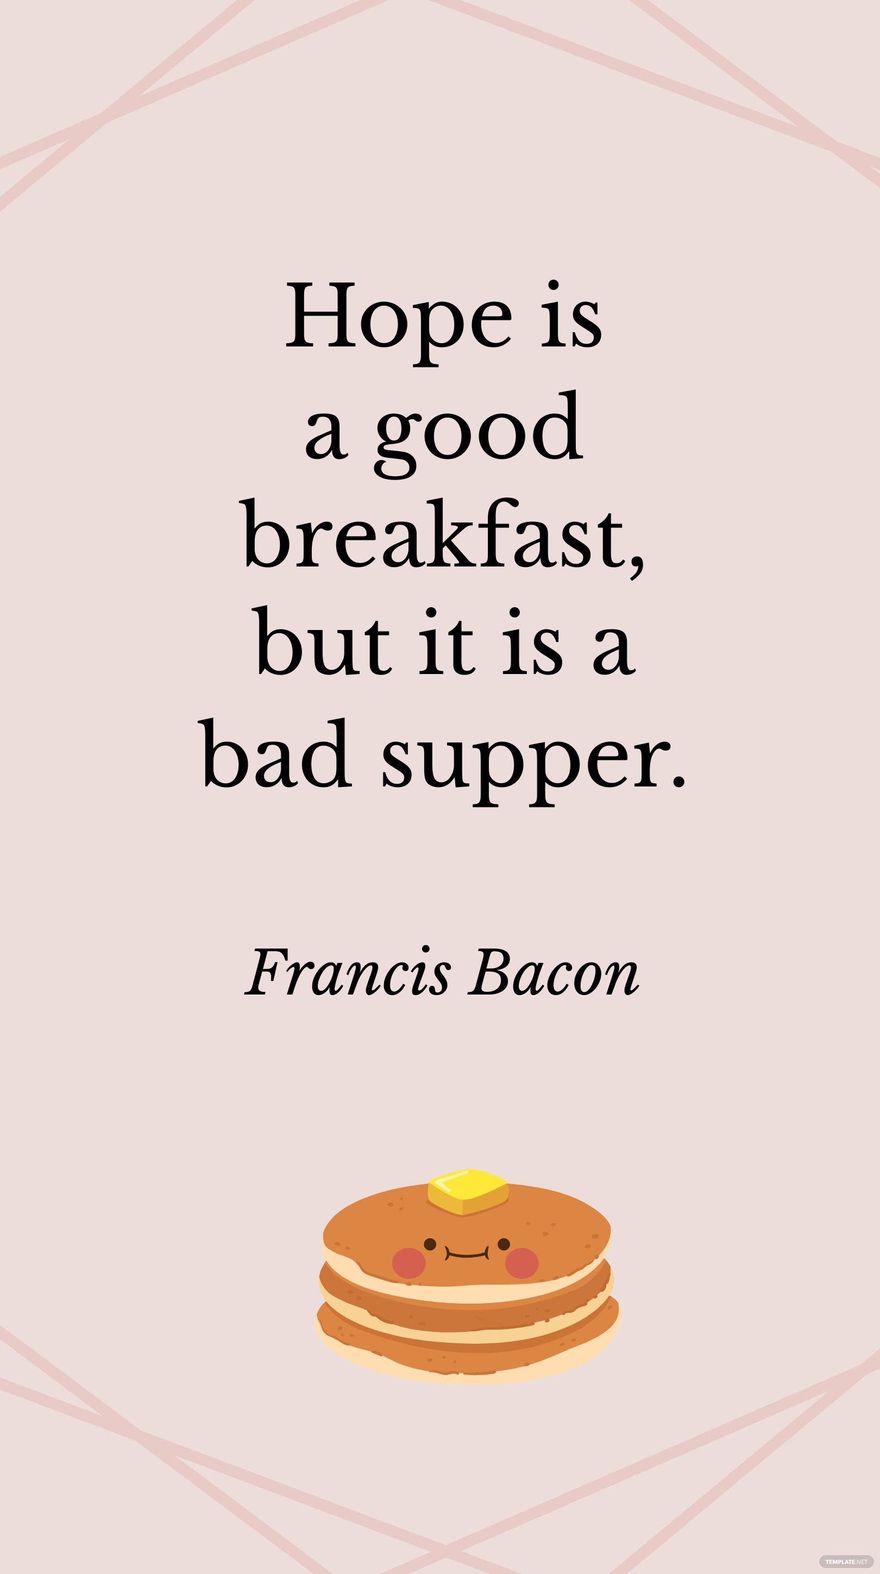 Free Francis Bacon - Hope is a good breakfast, but it is a bad supper.